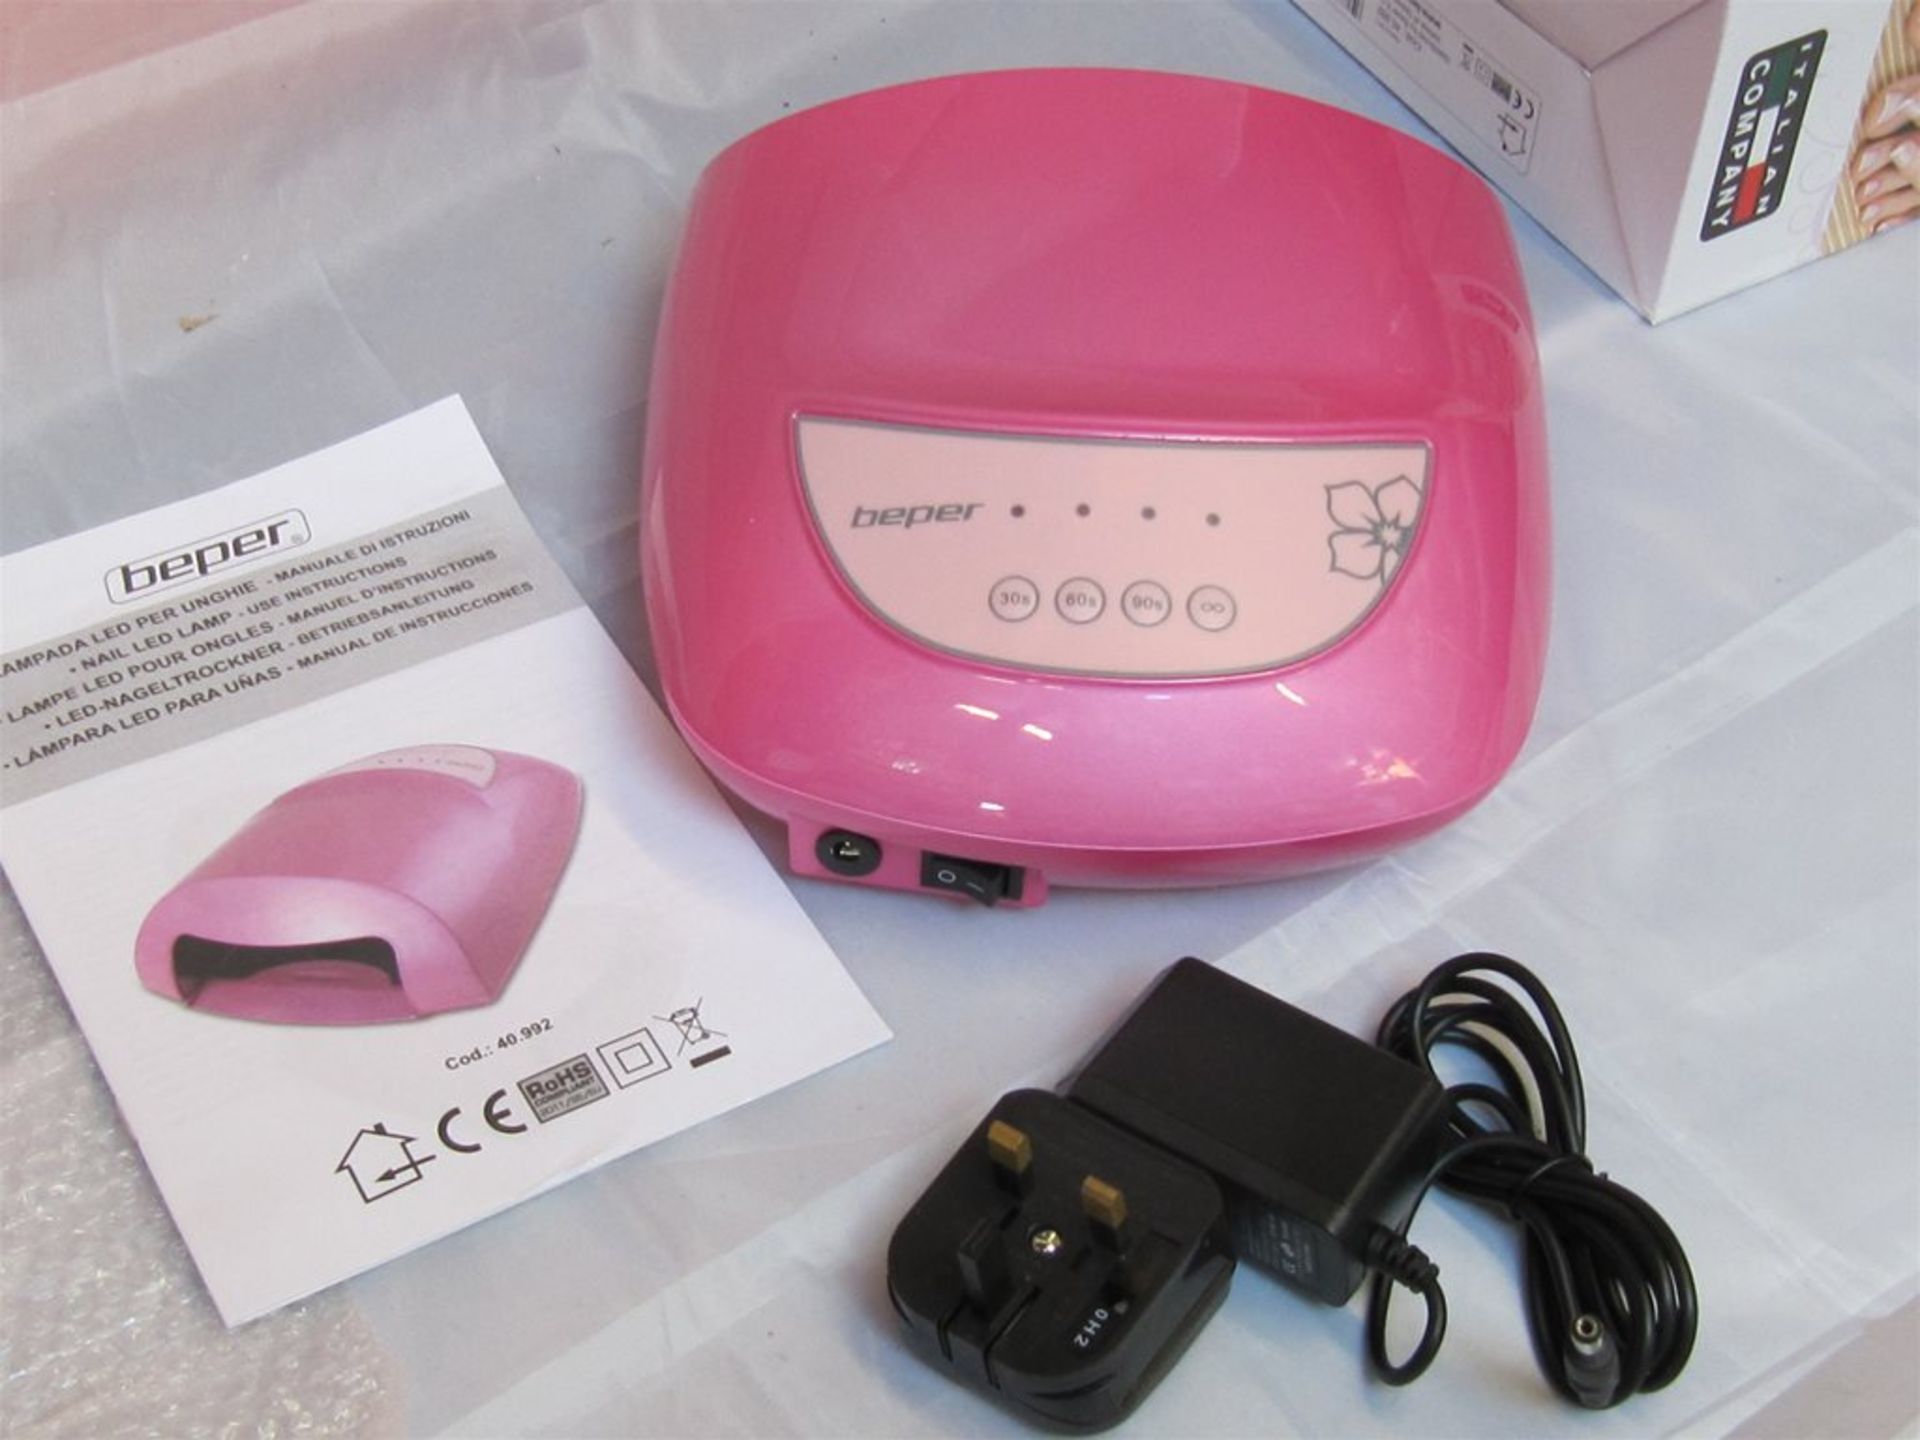 157) Beper LED Nail Lamp. 12w Rapid Dry Time. No vat on Hammer. - Image 2 of 4